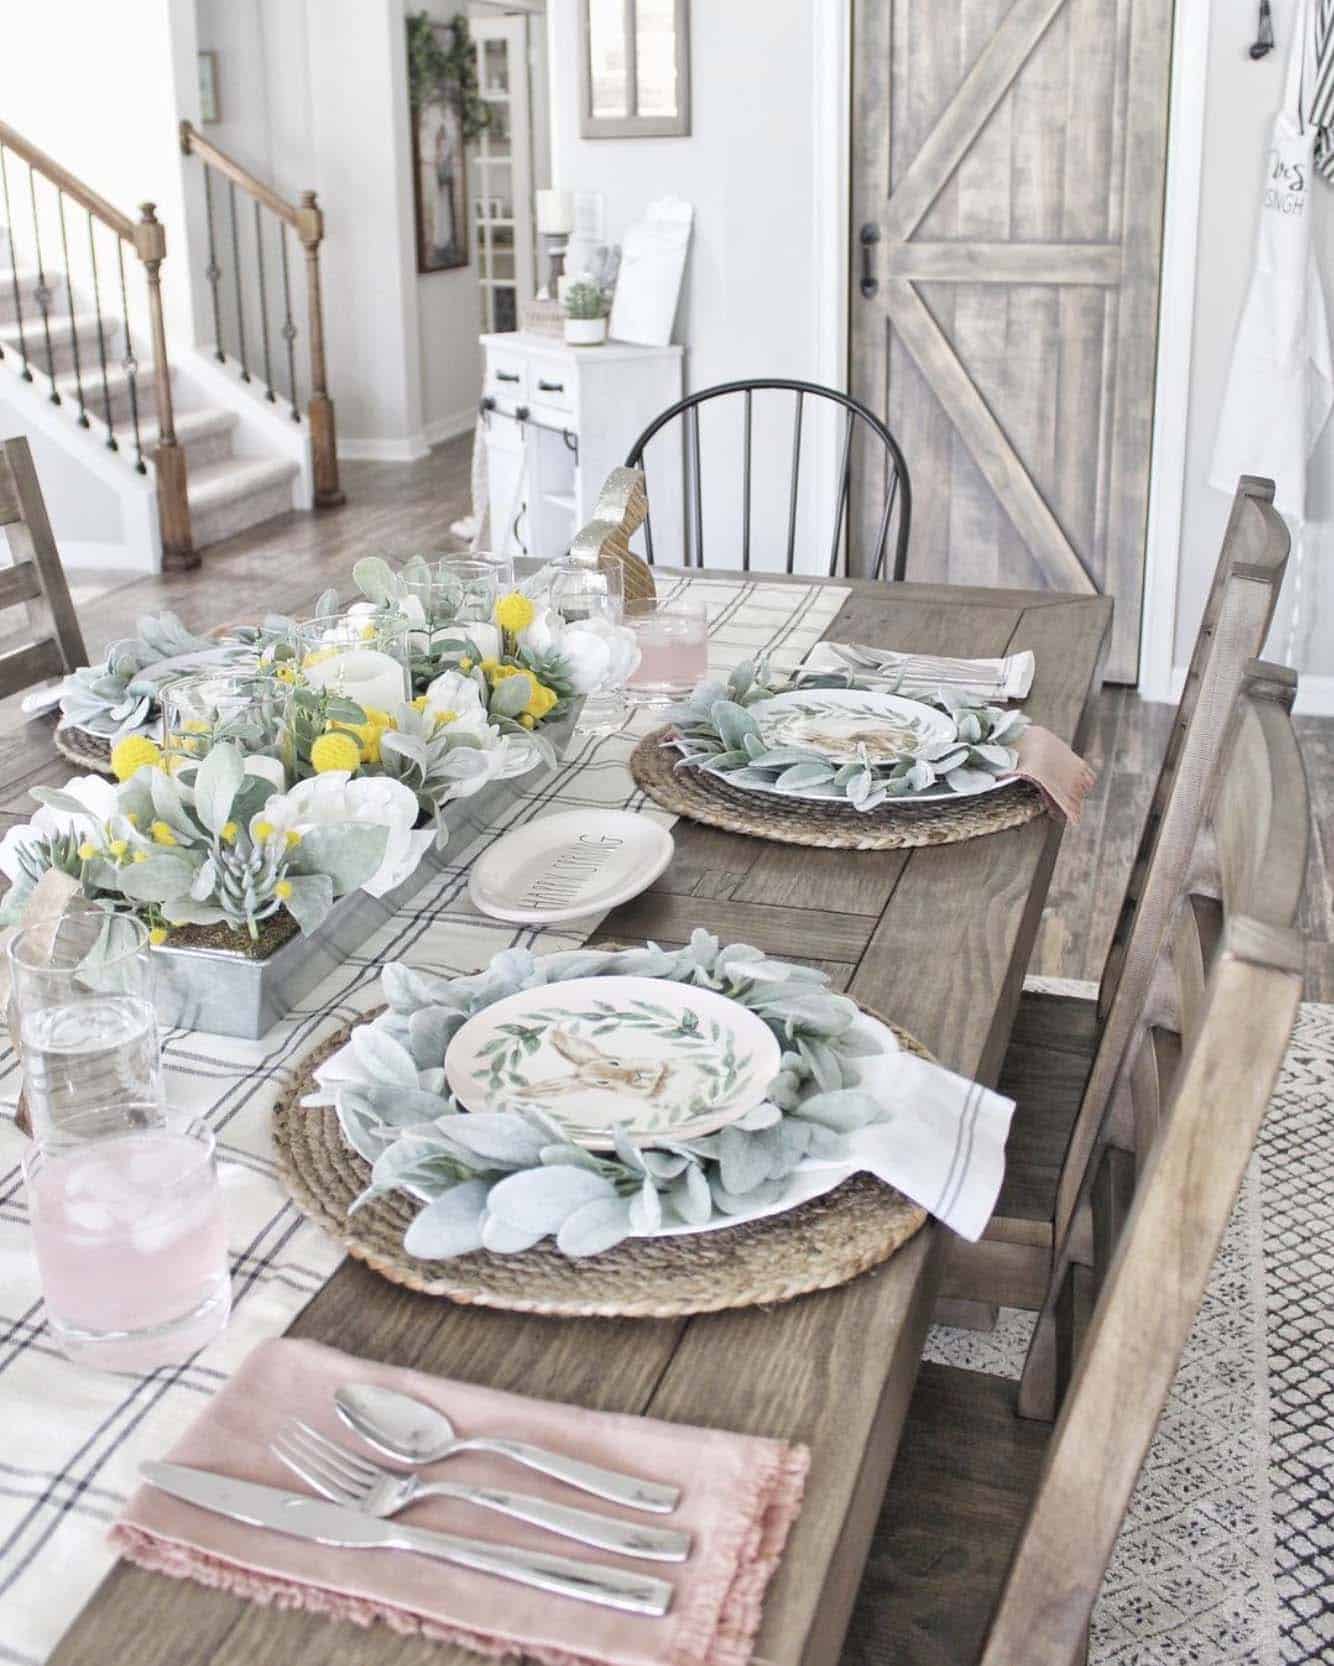 rustic-easter-decor-with-lambs-ear-and-bunny-plates